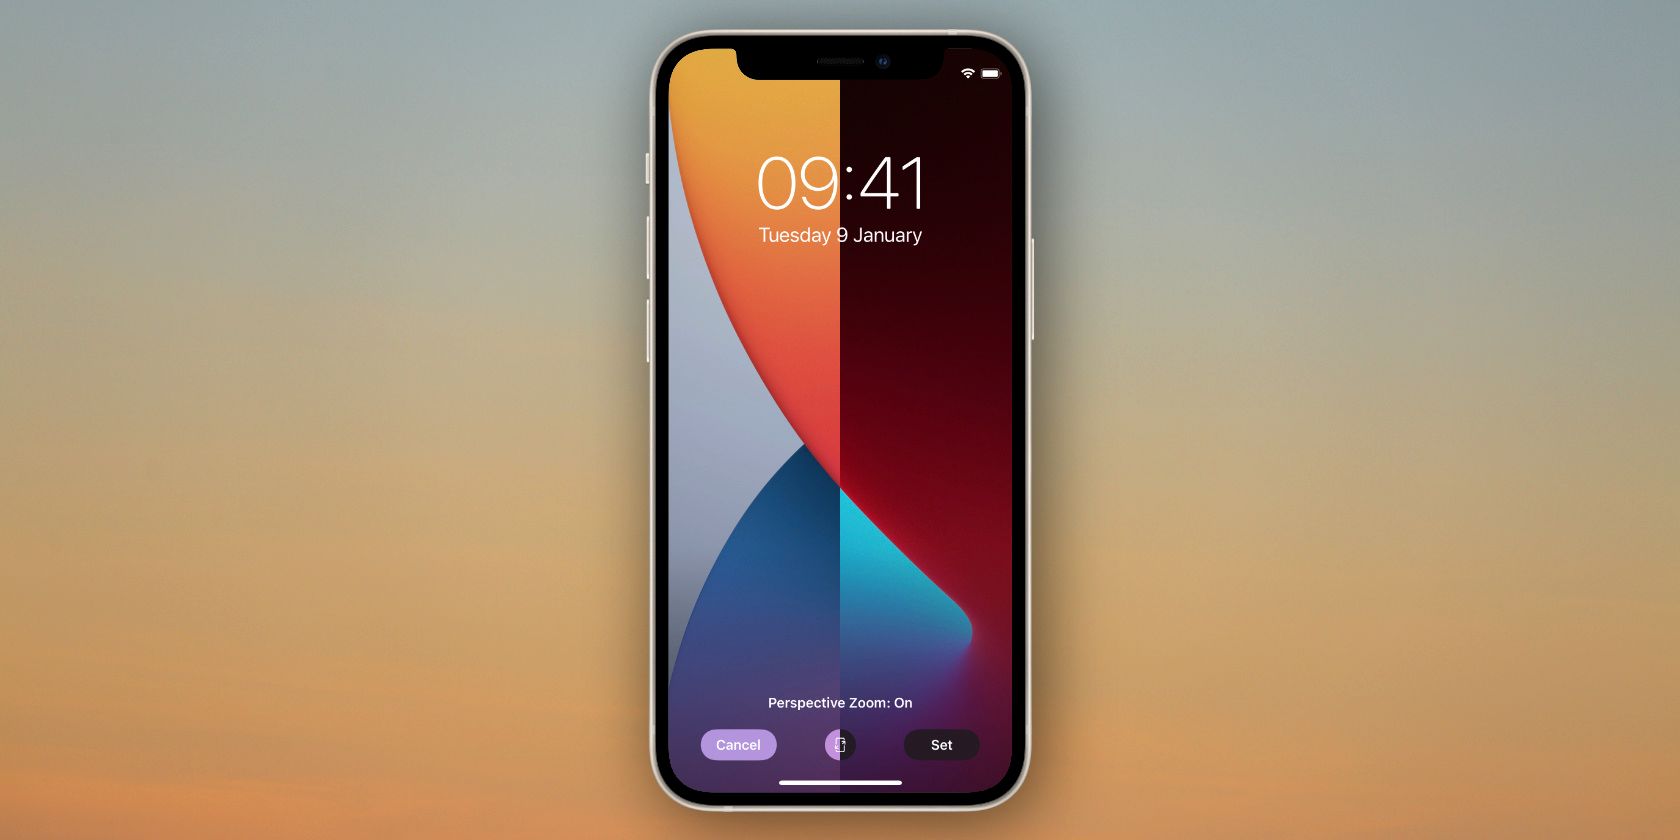 iPhone with Light and Dark Mode wallpaper over a sunset